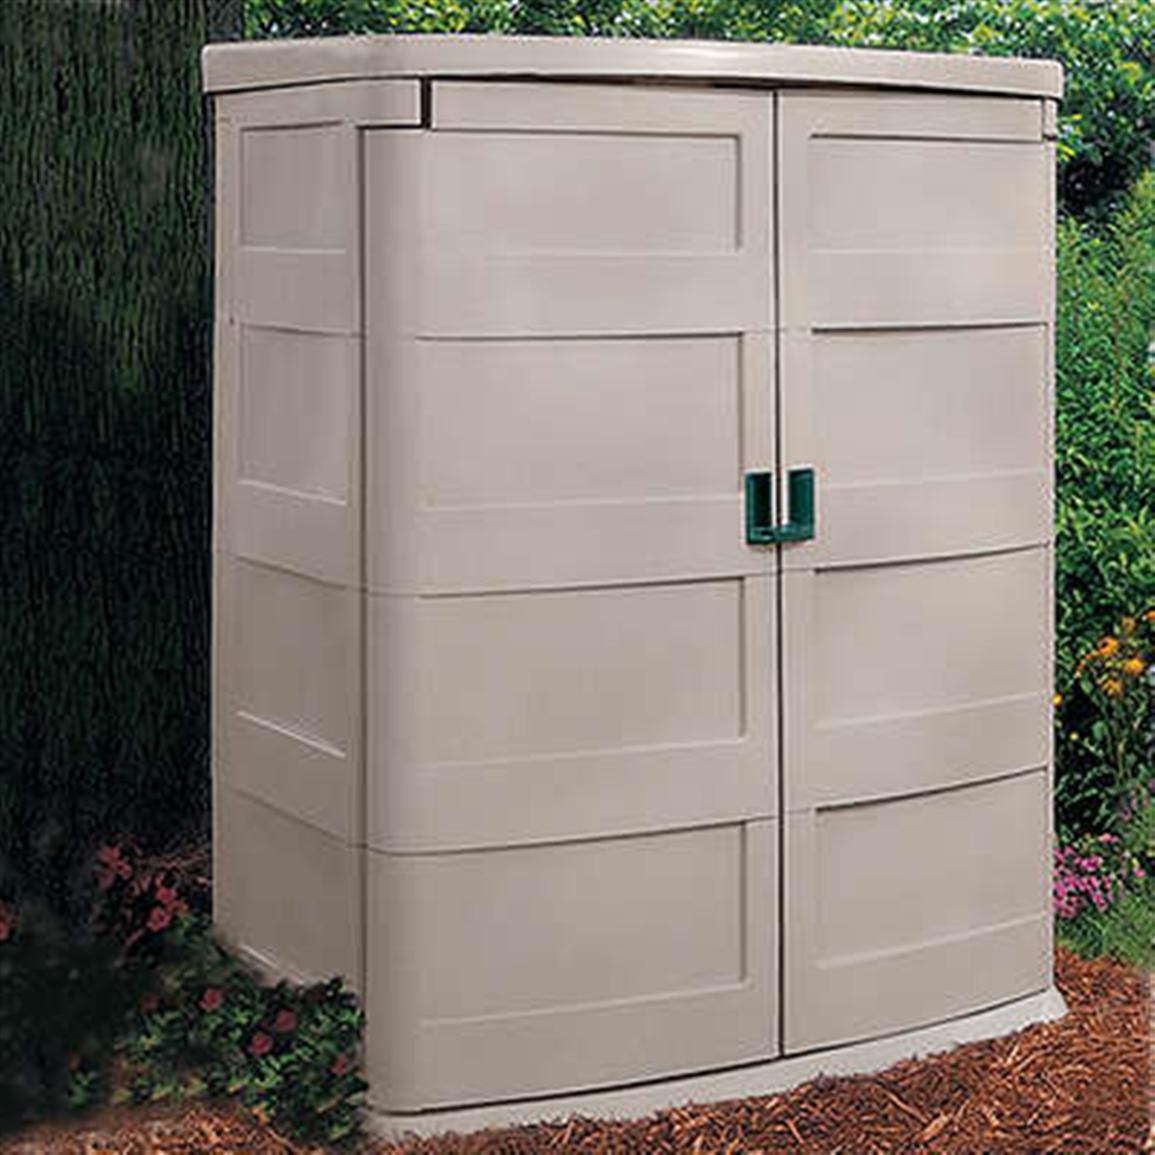 Suncast® Vertical Garden Shed - 138476, Patio Storage at ...